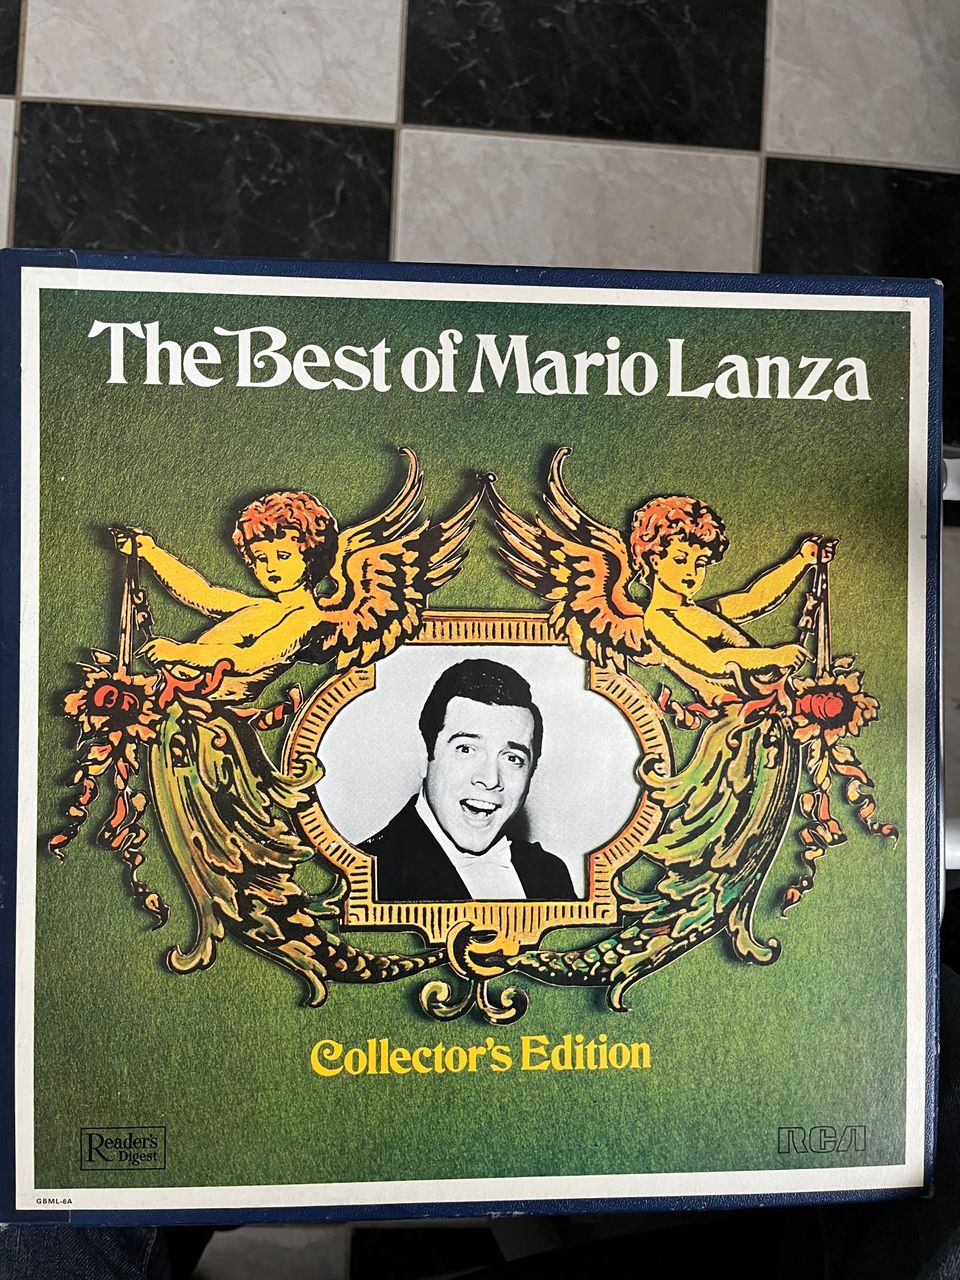 Mario Lanza(the best of)Gollector`s Edition.